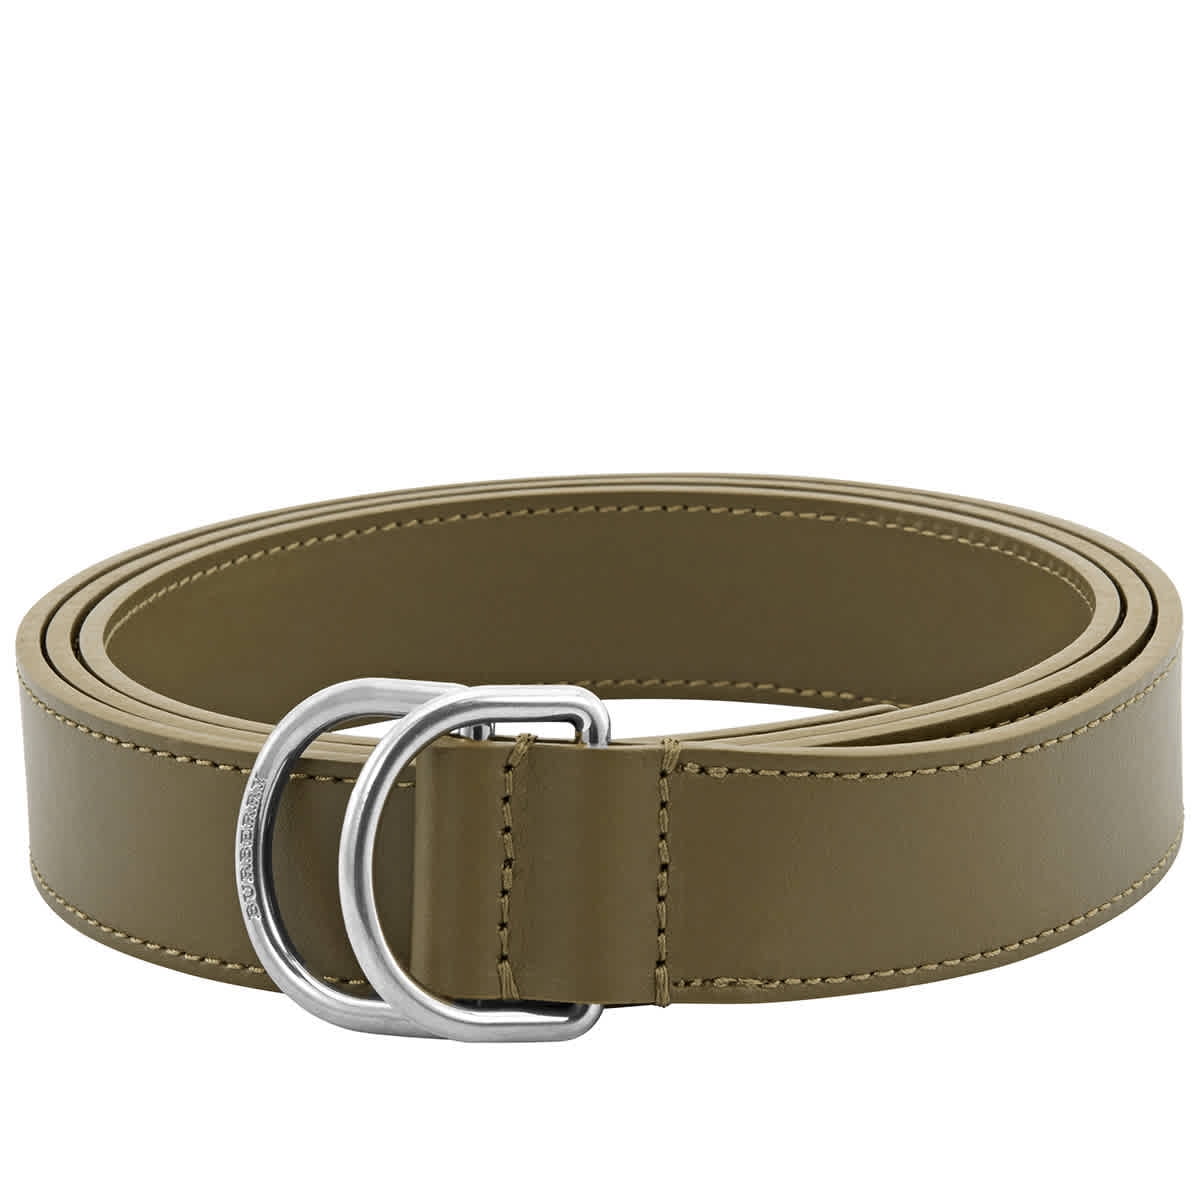 Burberry Double D-ring Leather Belt In Military Green, Brand Size 100 CM -  